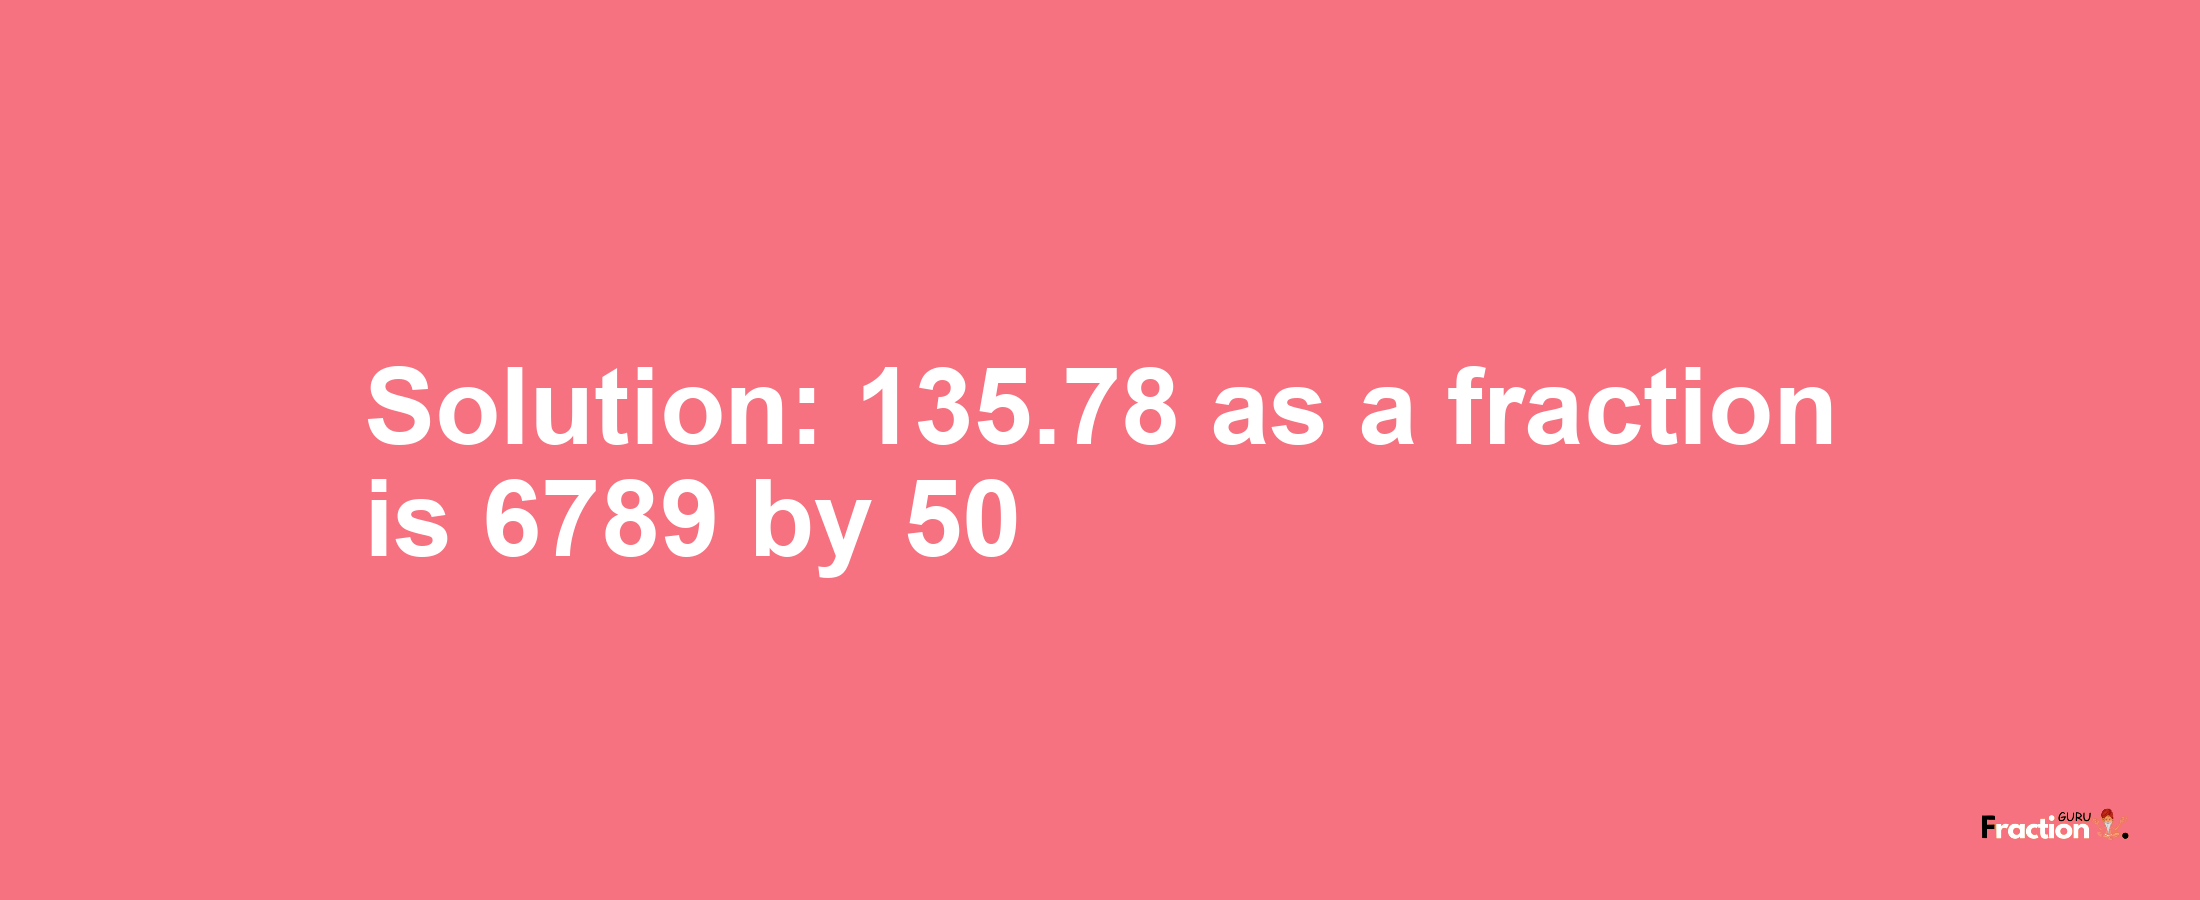 Solution:135.78 as a fraction is 6789/50